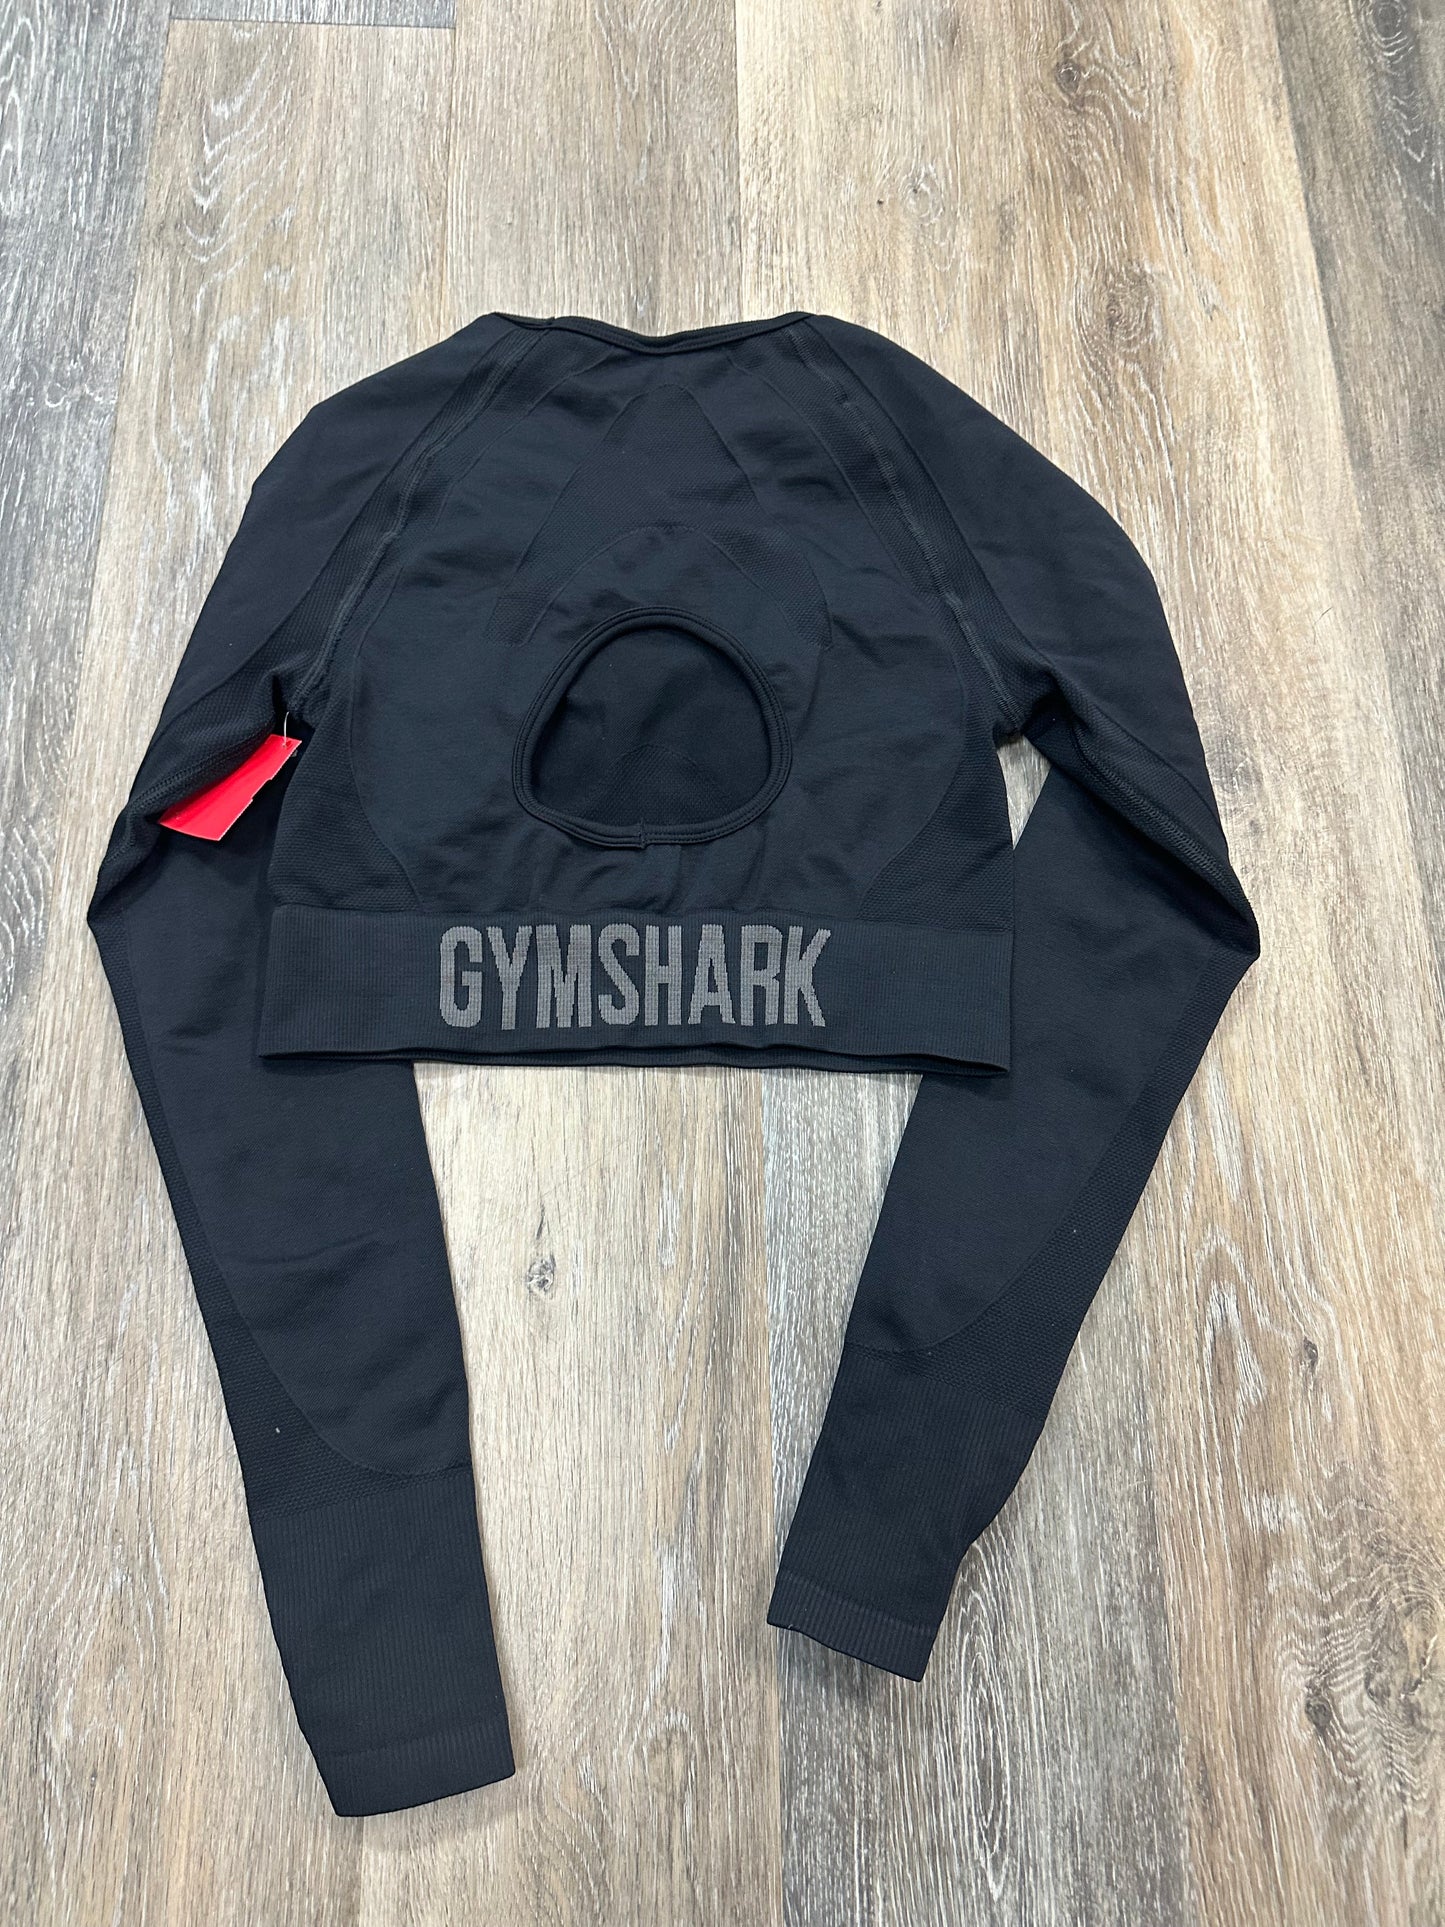 Athletic Top Long Sleeve Collar By Gym Shark  Size: M